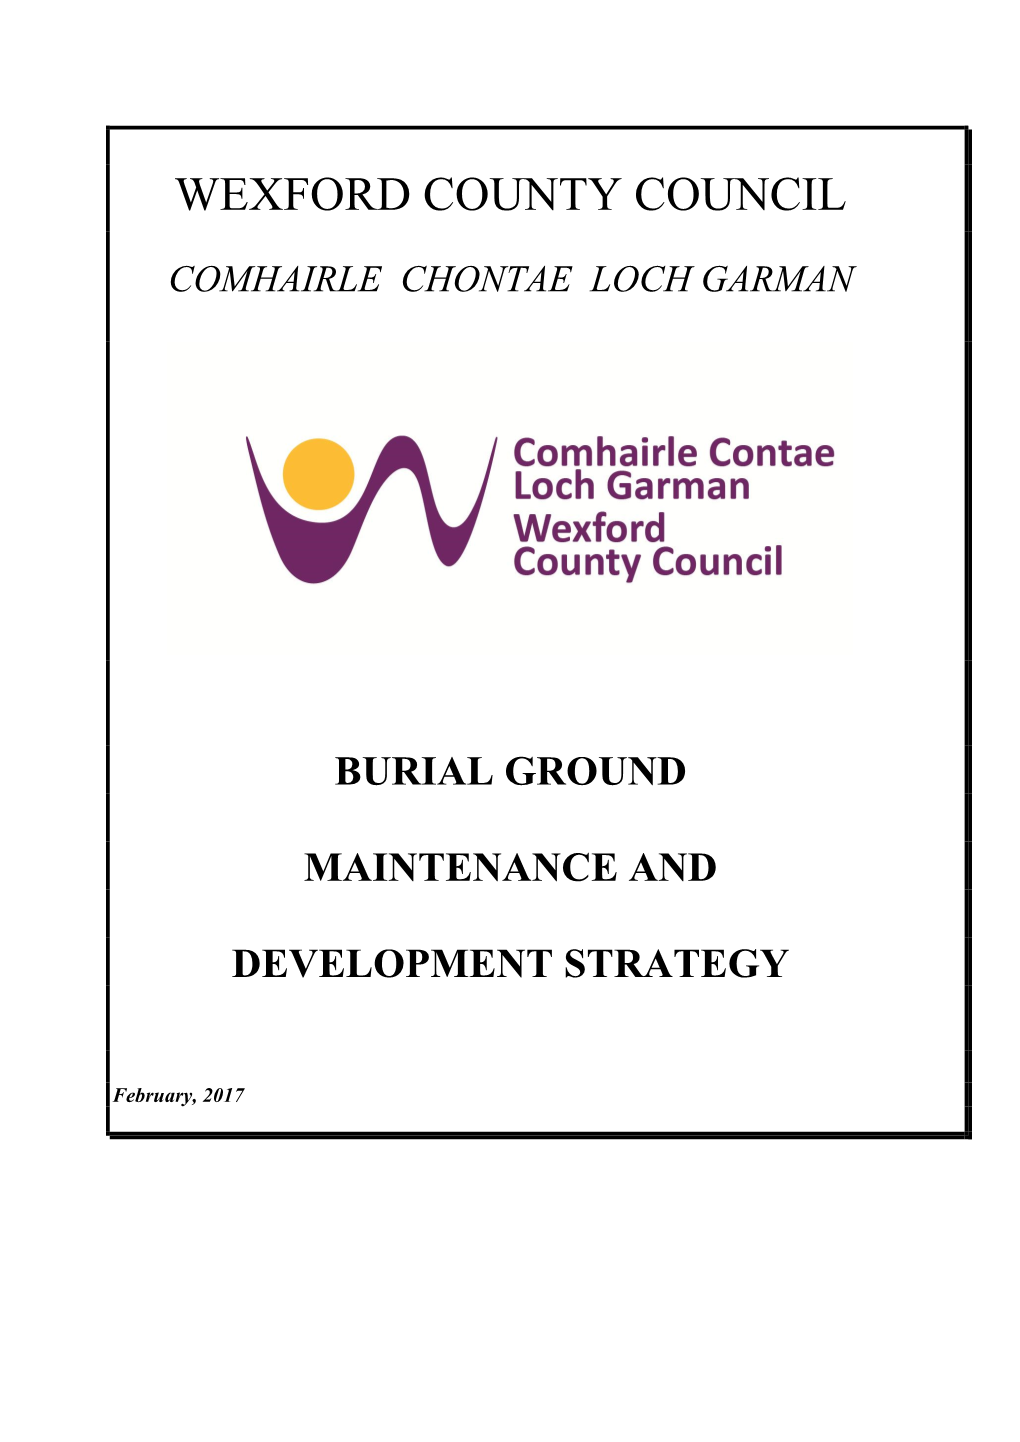 Burial Ground Maintenance and Development Strategy